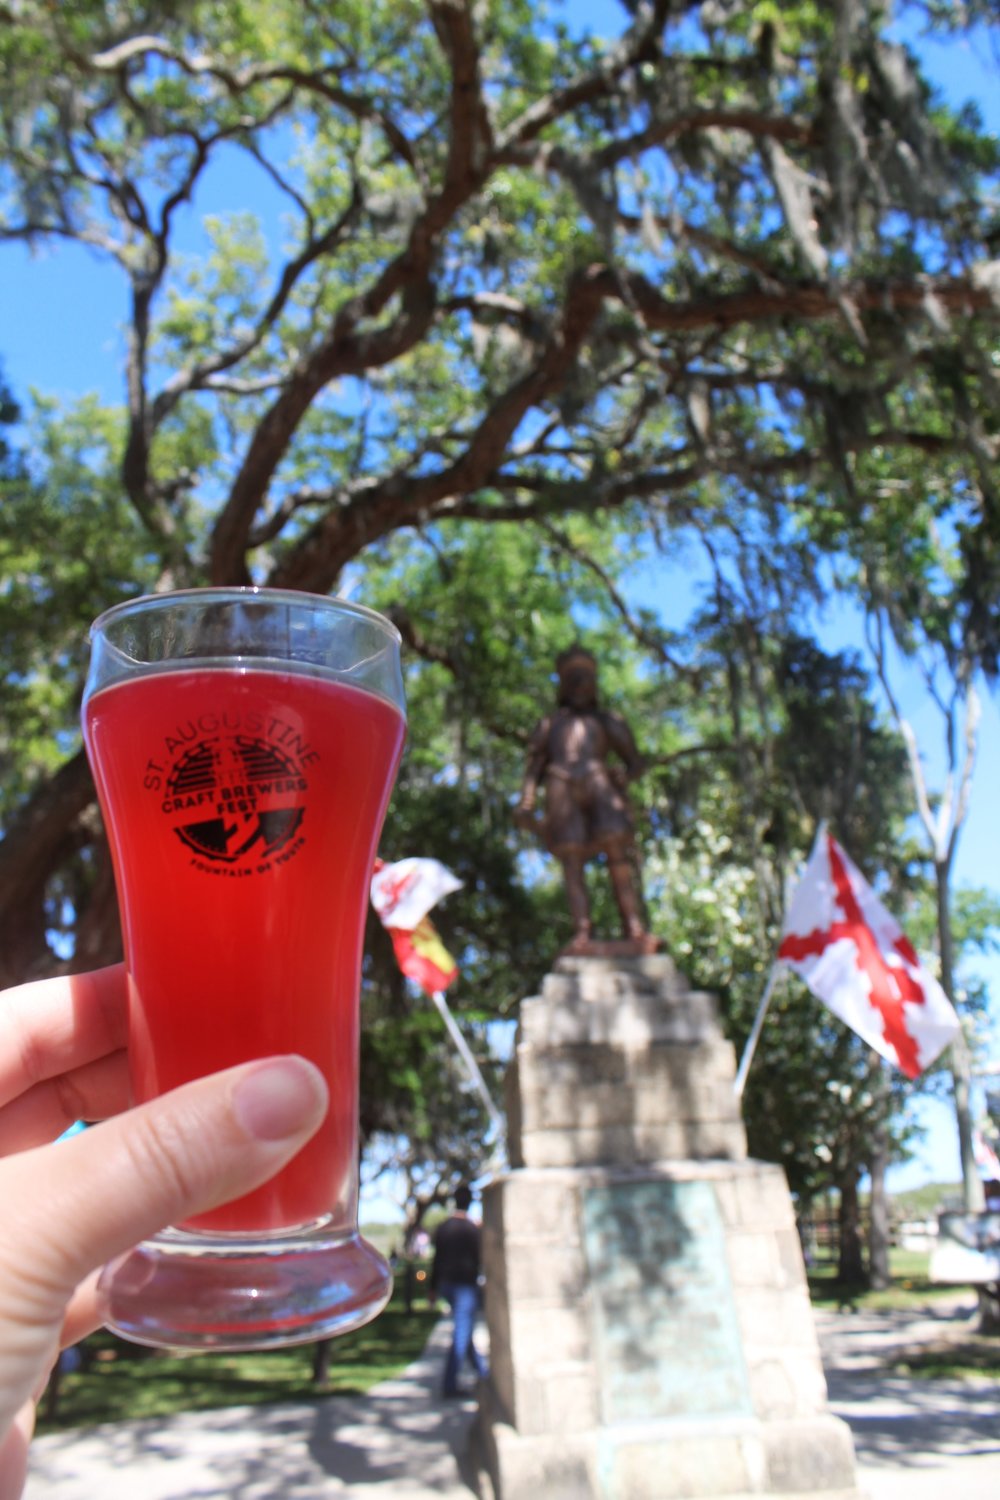 The St. Augustine Brewers’ Festival will be held May 7 at the Fountain of Youth Archeological Park.